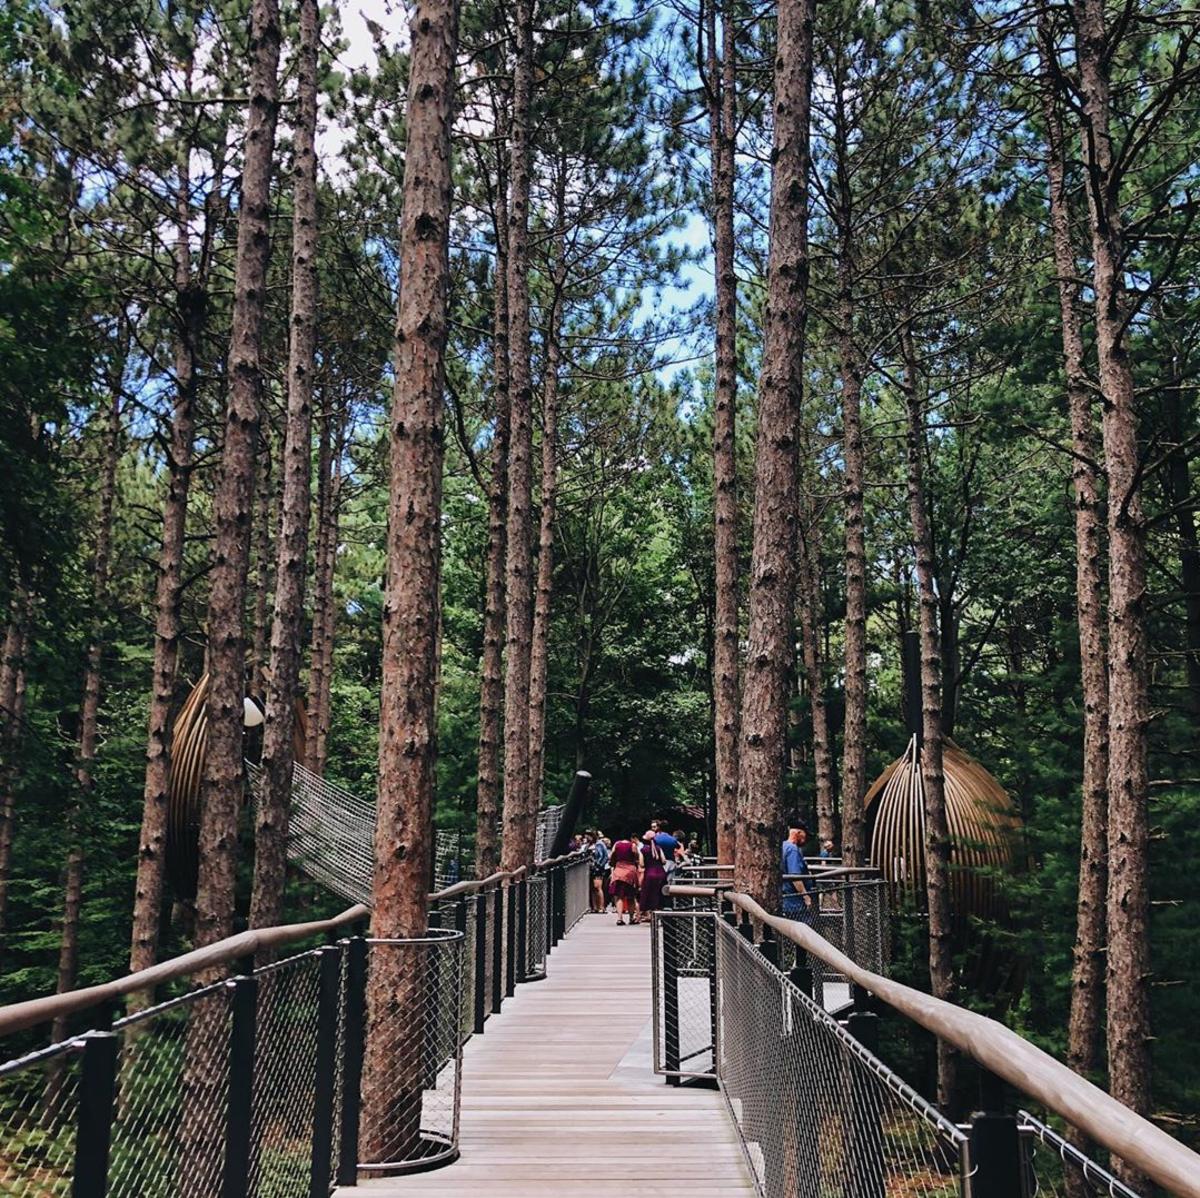 People walking through a forest of towering pines at Whiting Forest of Dow Gardens Canopy Walk